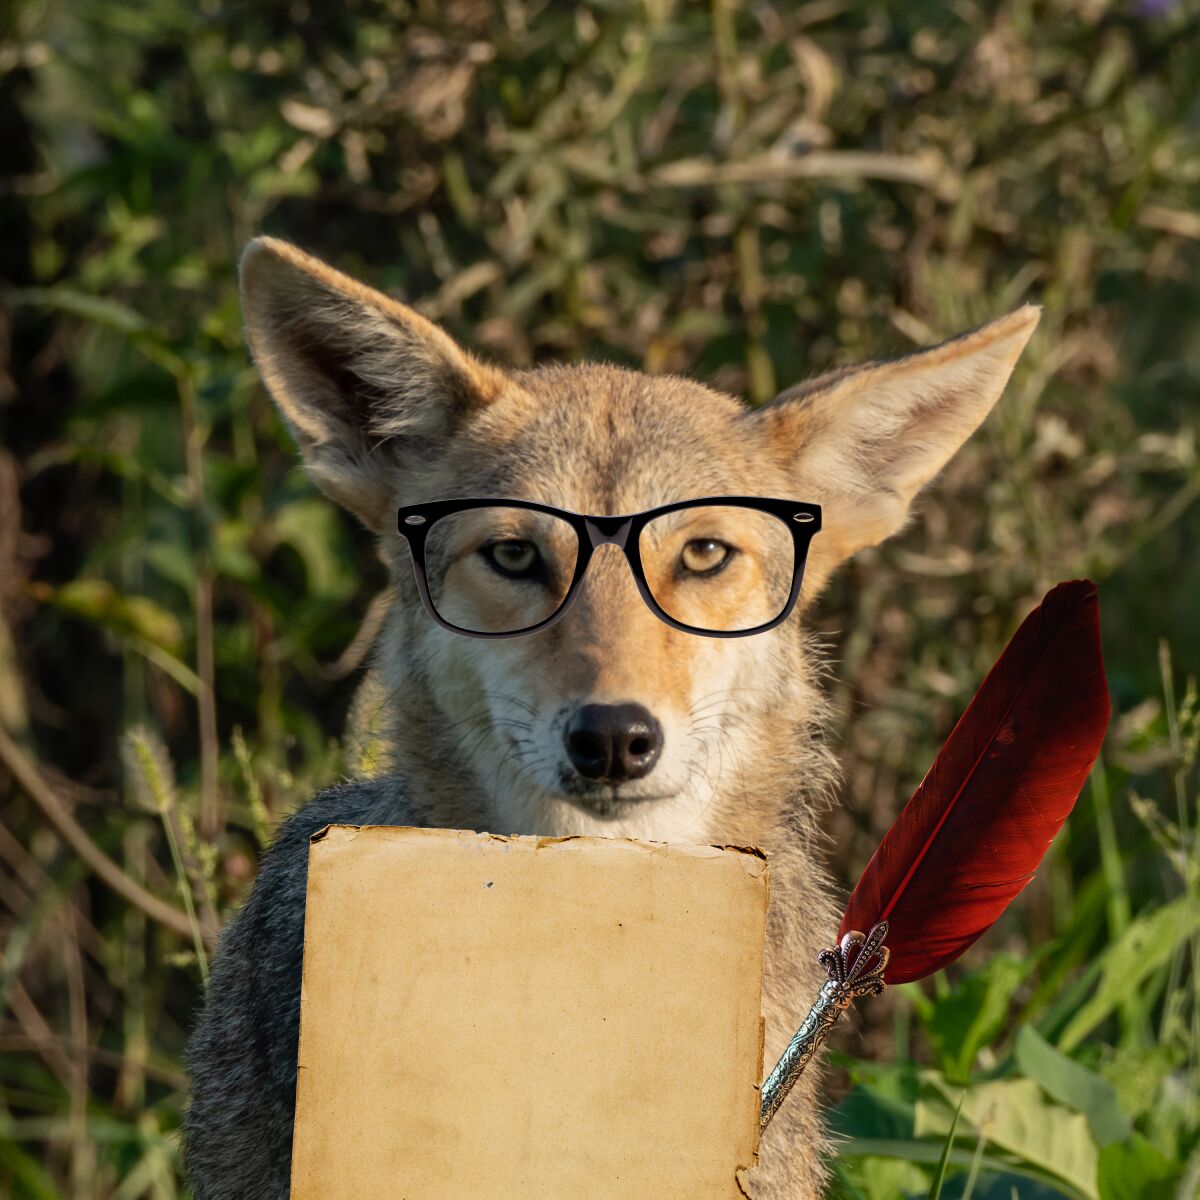 A coyote is wearing glasses and holding parchment paper and a feather quill.